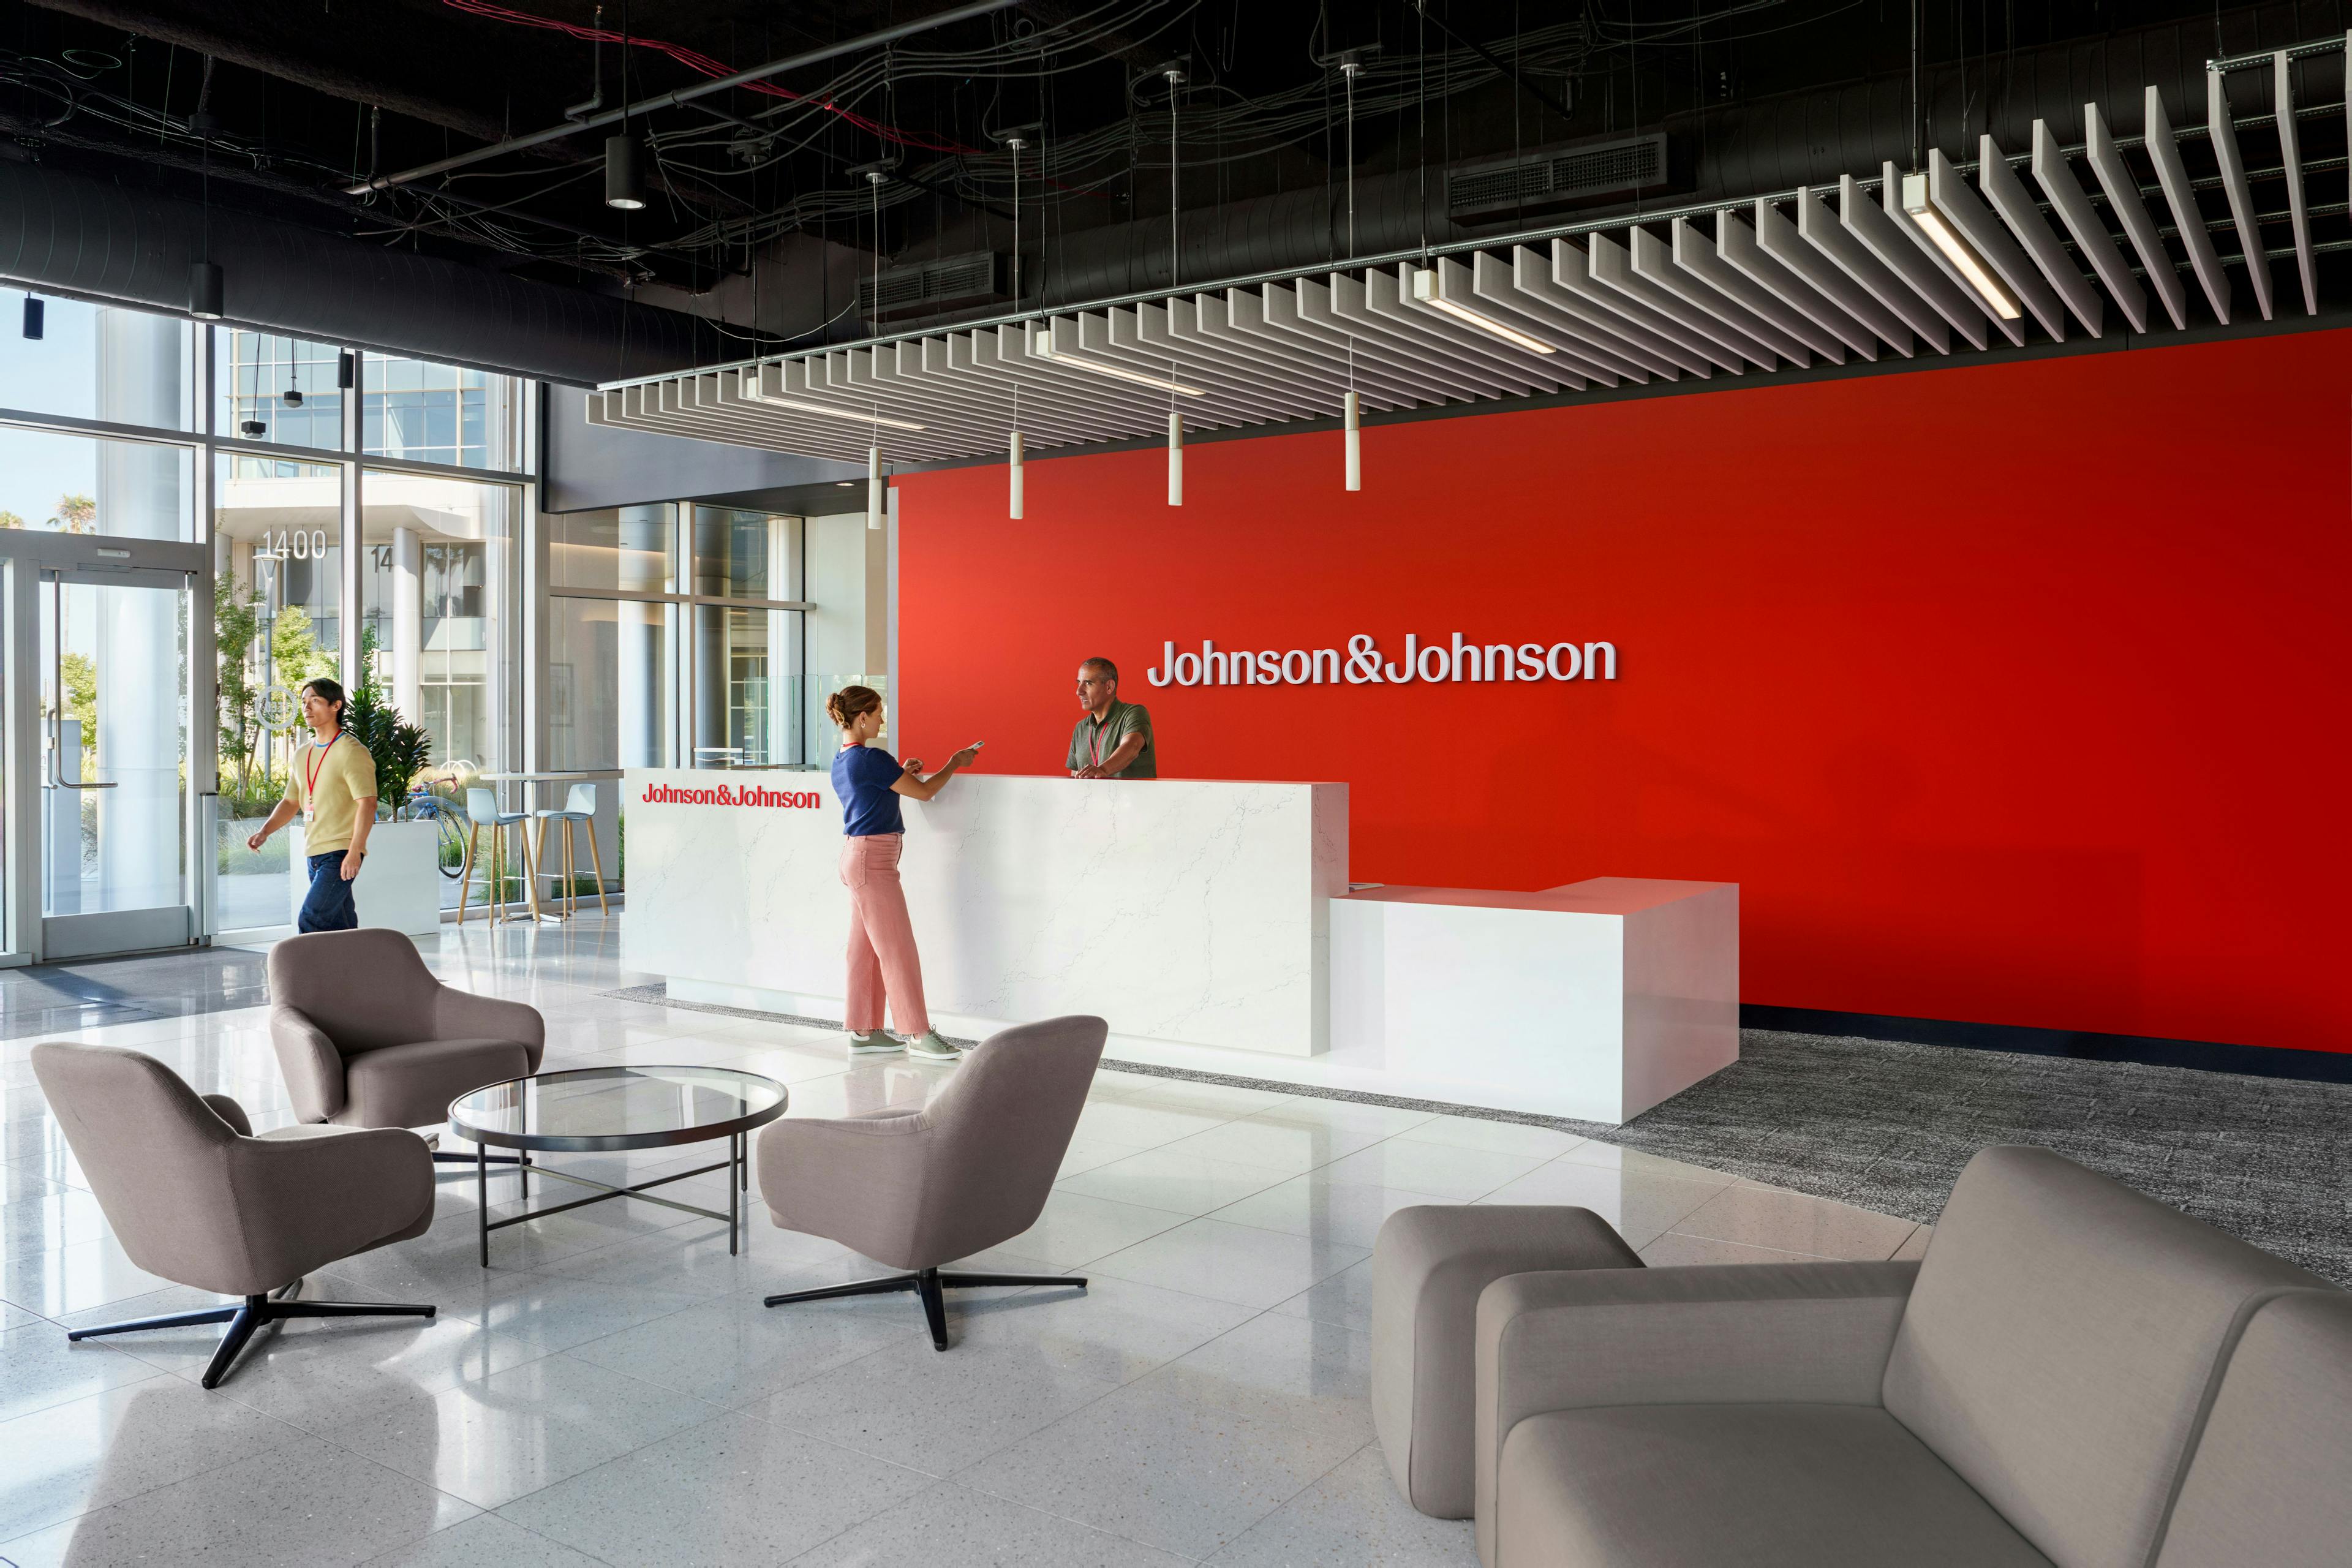 The new Johnson and Johnson logo in a lobby.